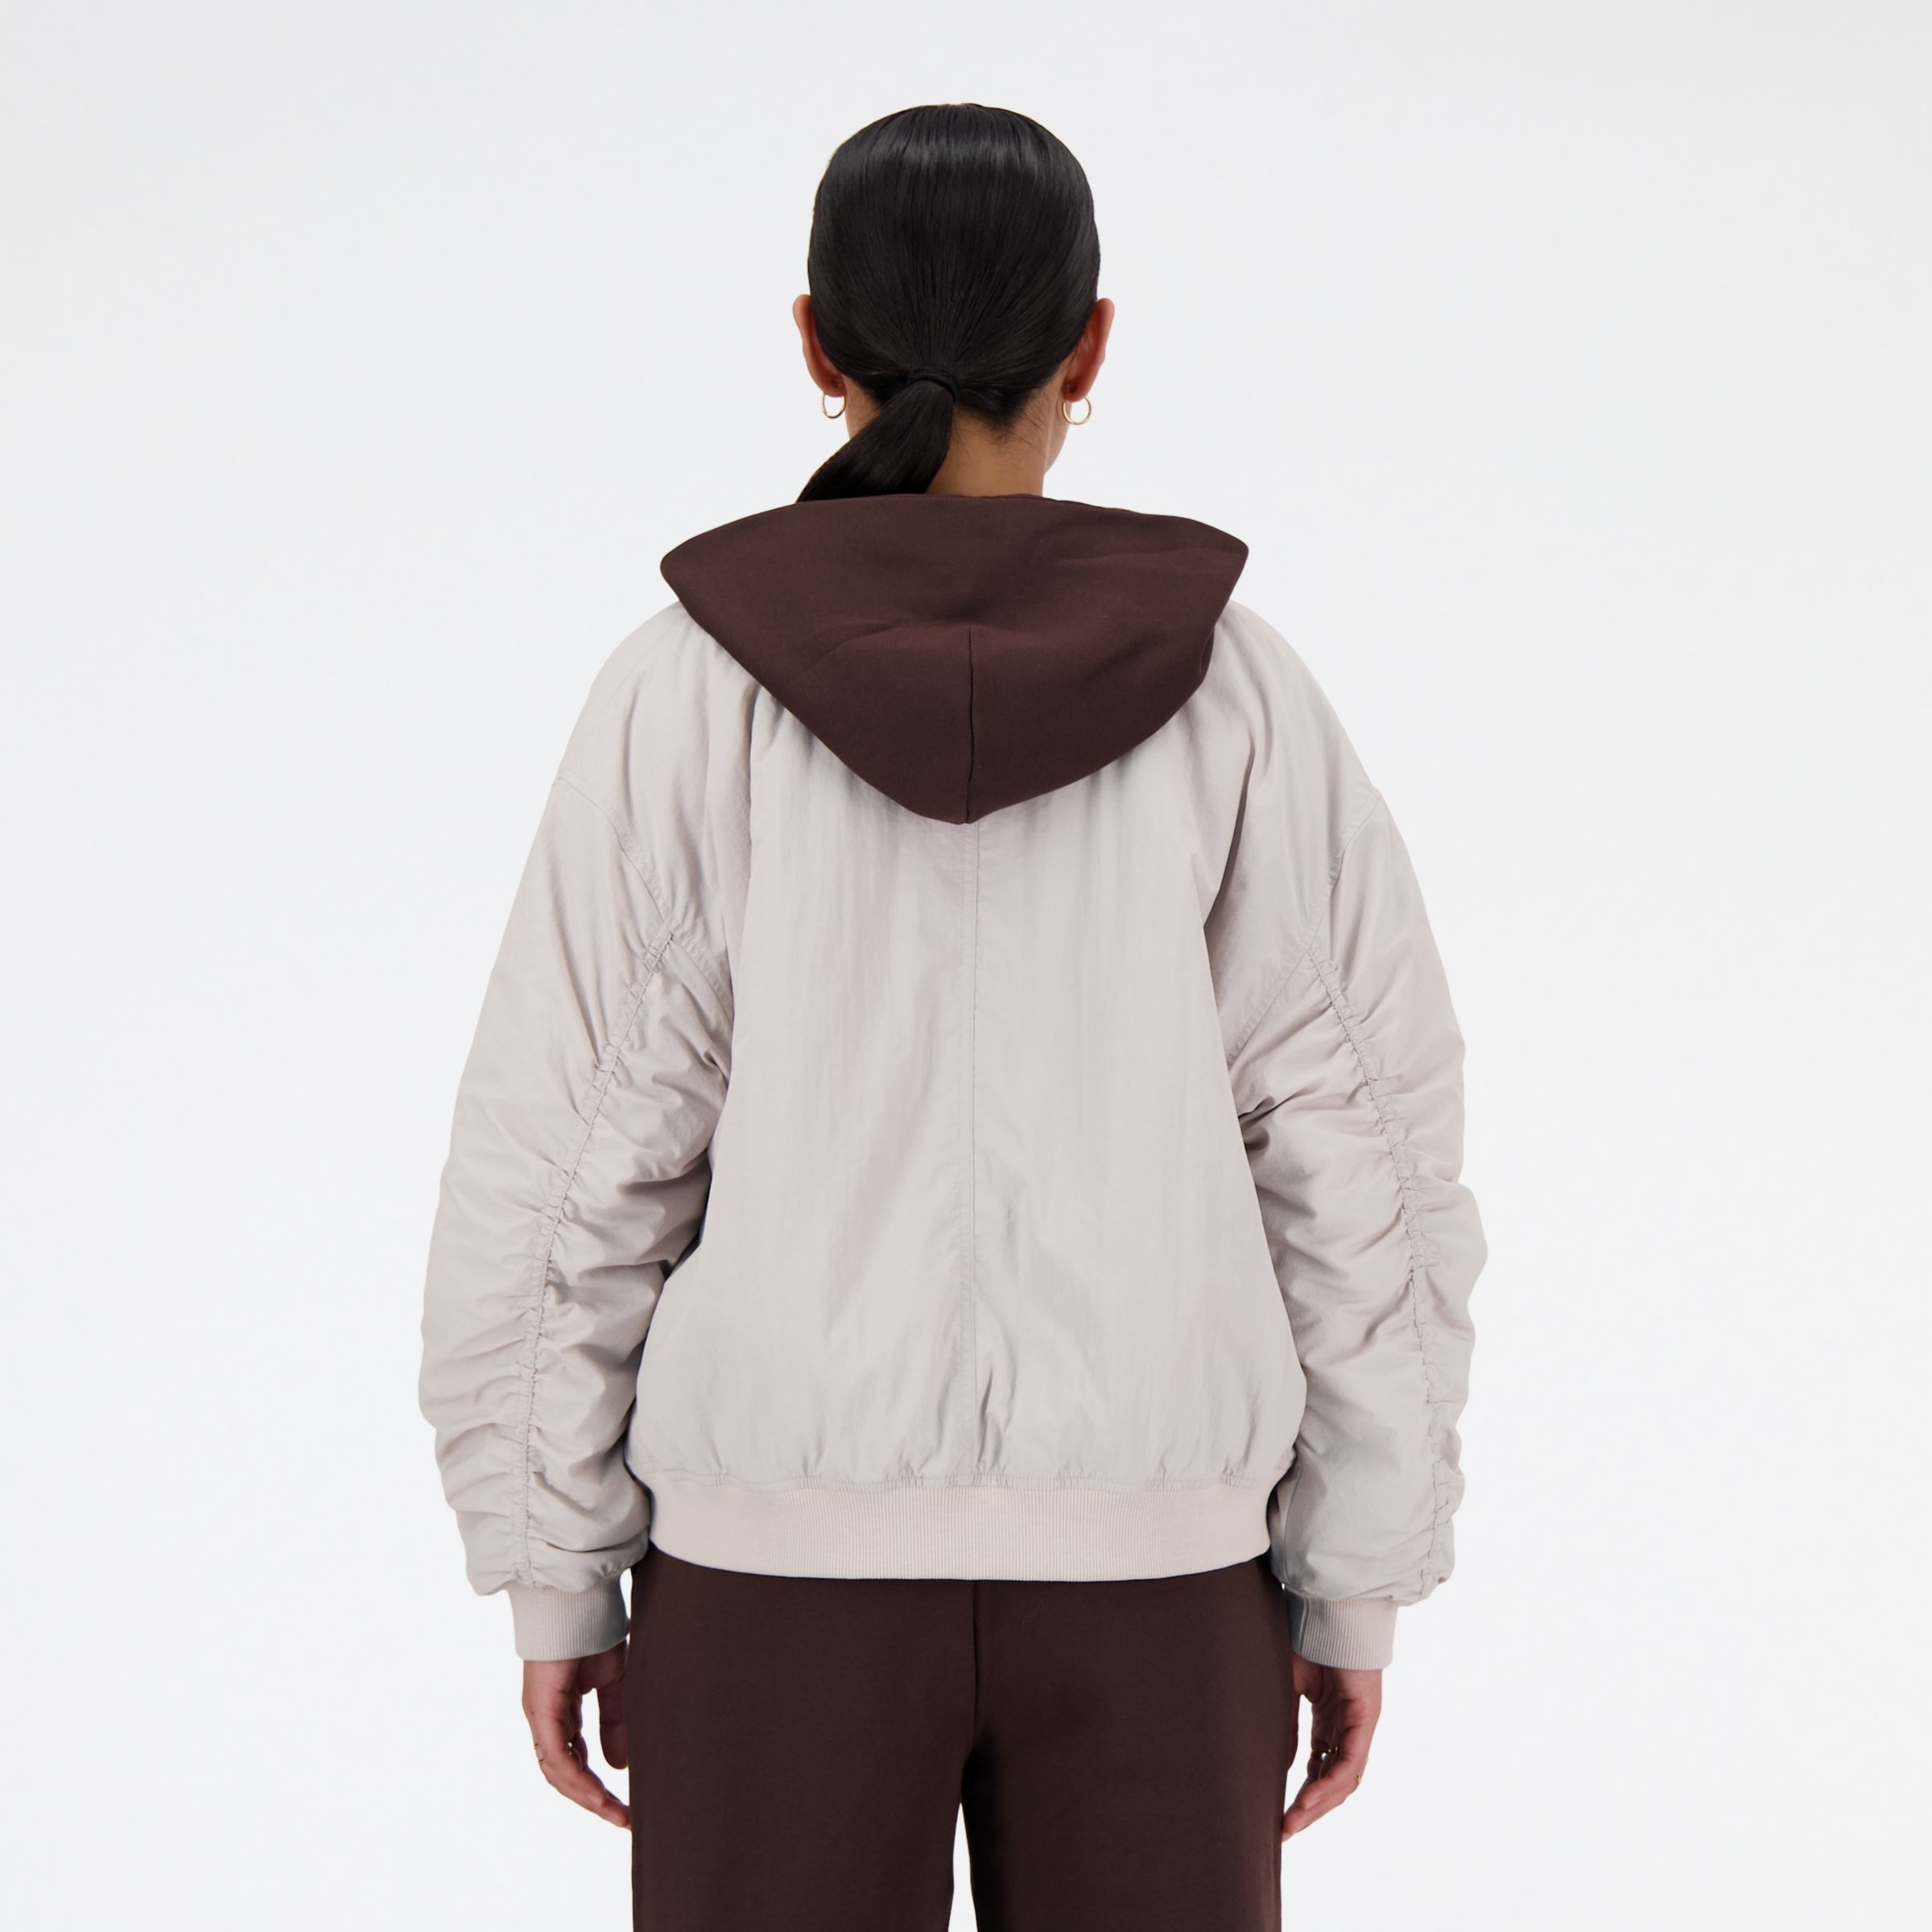 Linear Heritage Woven Bomber Jacket - 5